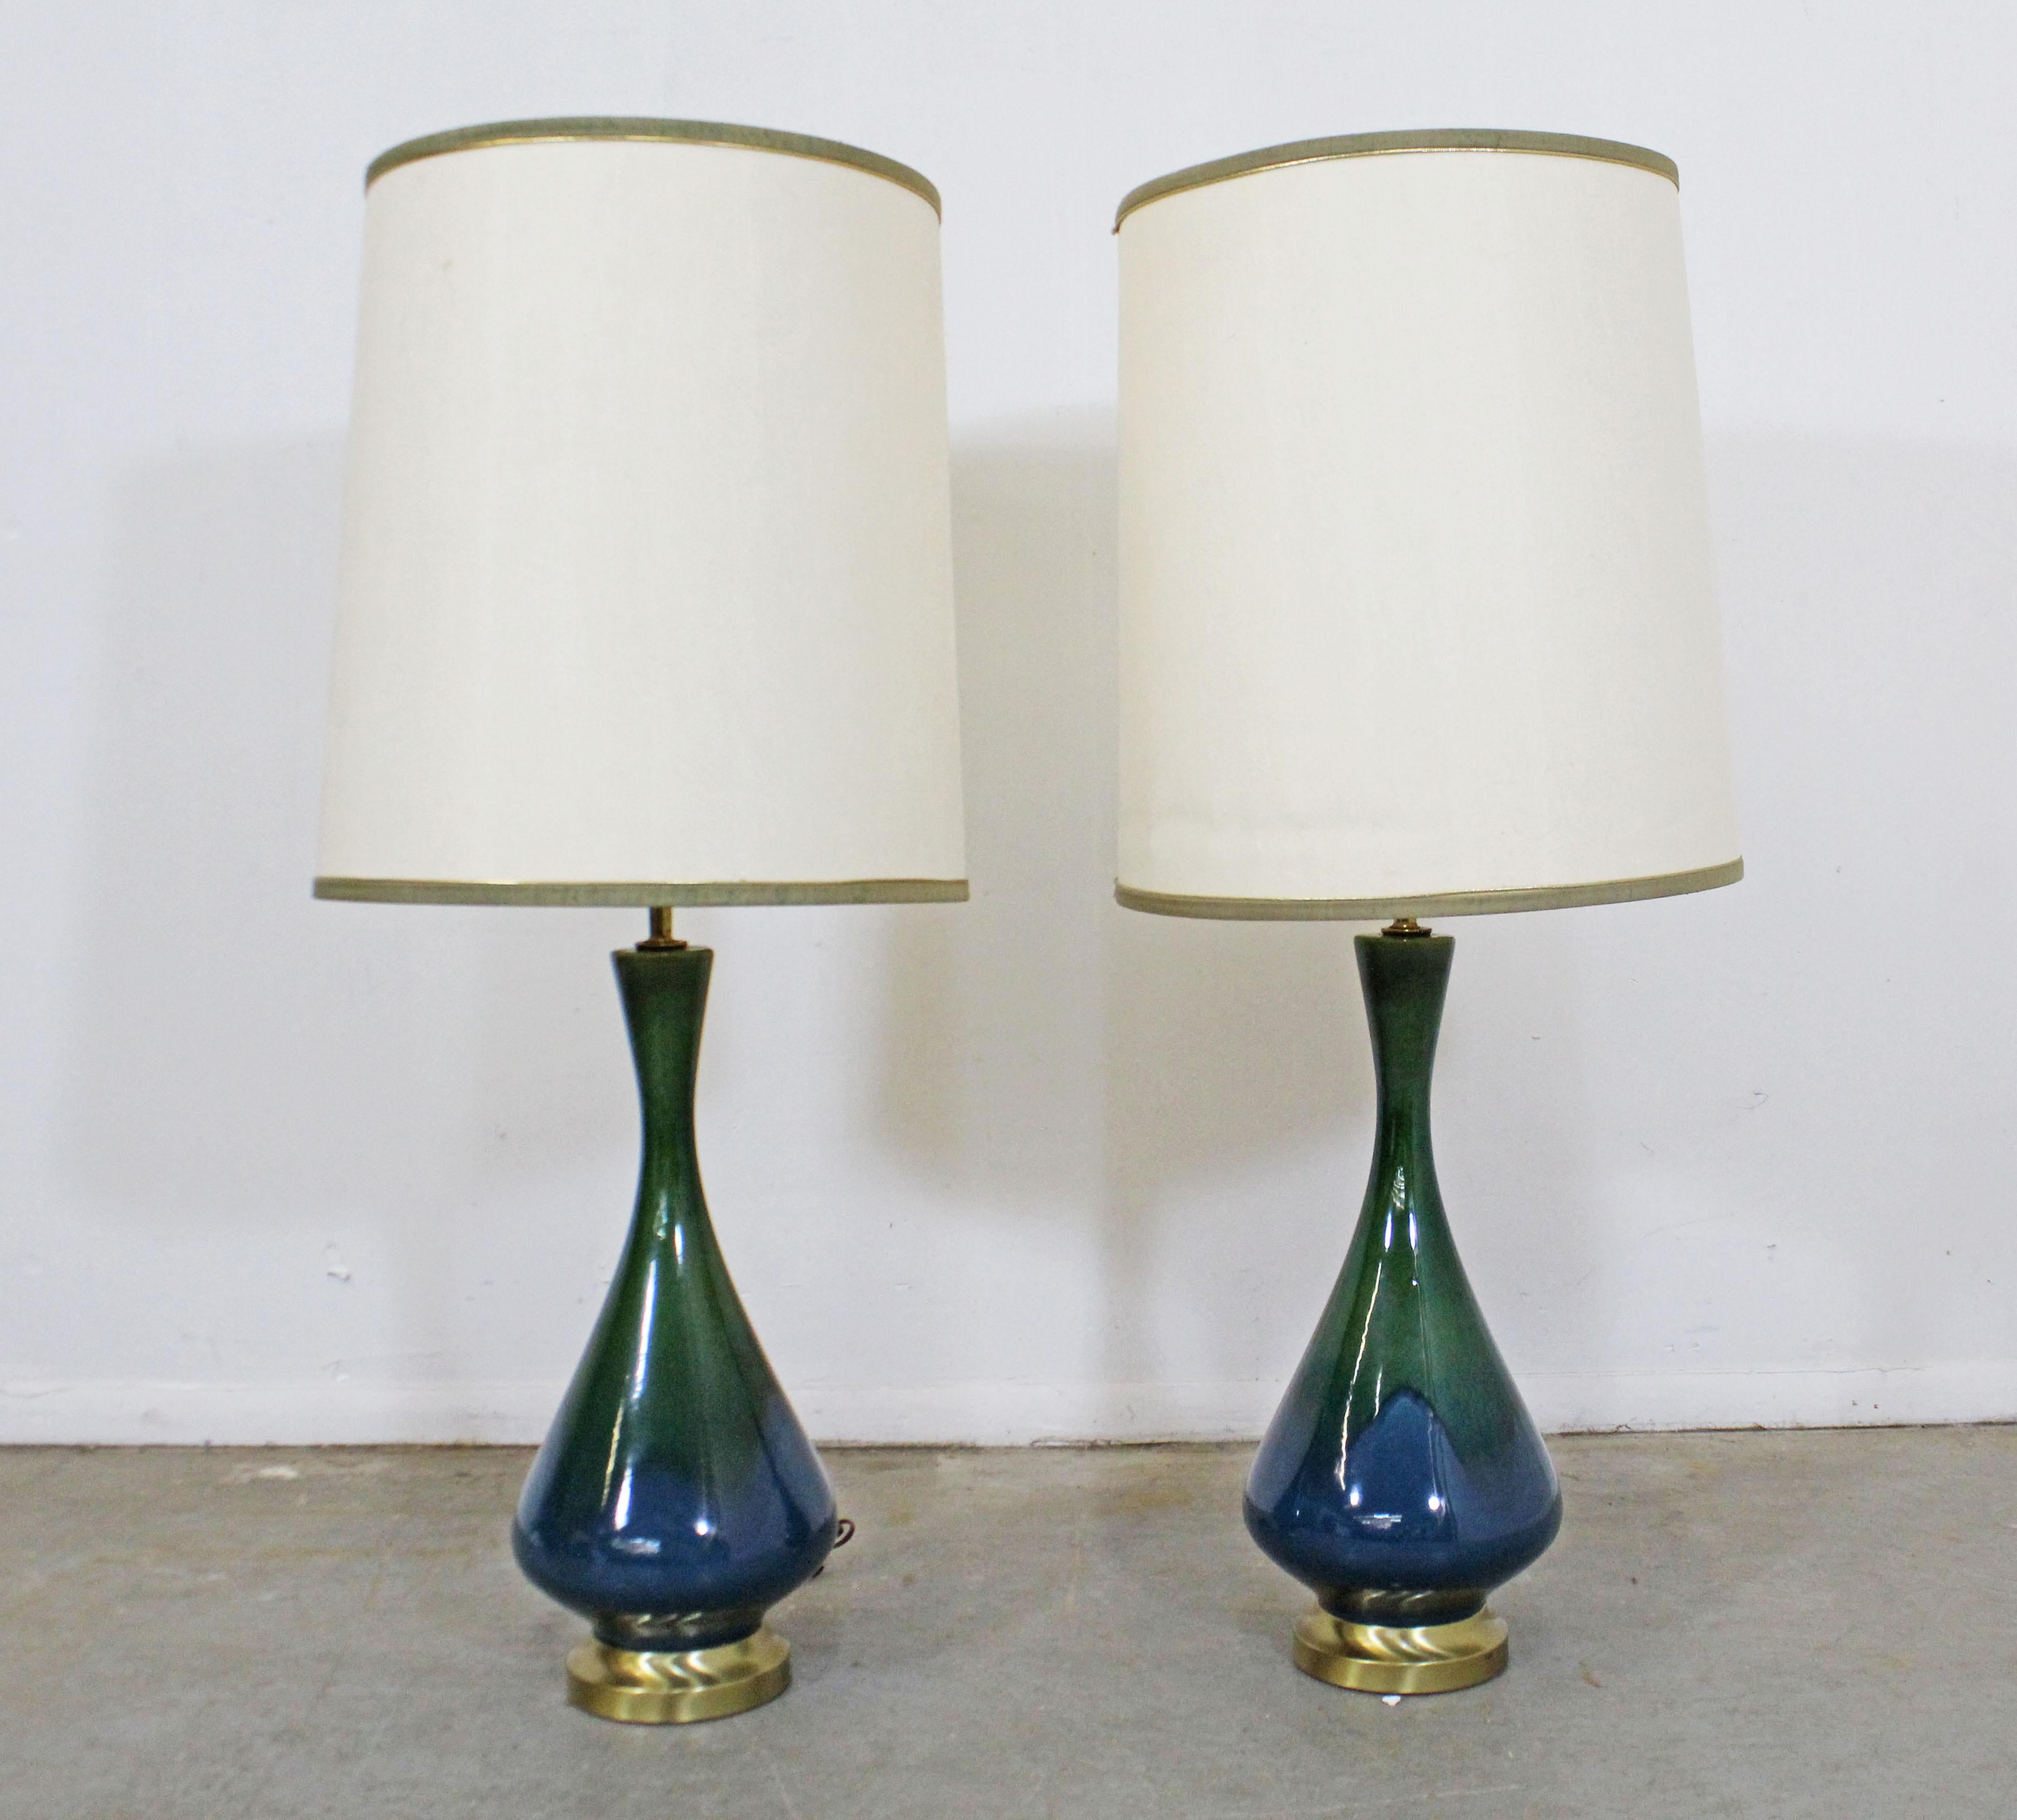 Pair of Mid-Century Modern blue green drip glaze table lamps

Offered is a unique Mid-Century Modern pair of table lamps. They are made of blue and green drip-glazed ceramic with brass bases. They are in good, working condition showing some